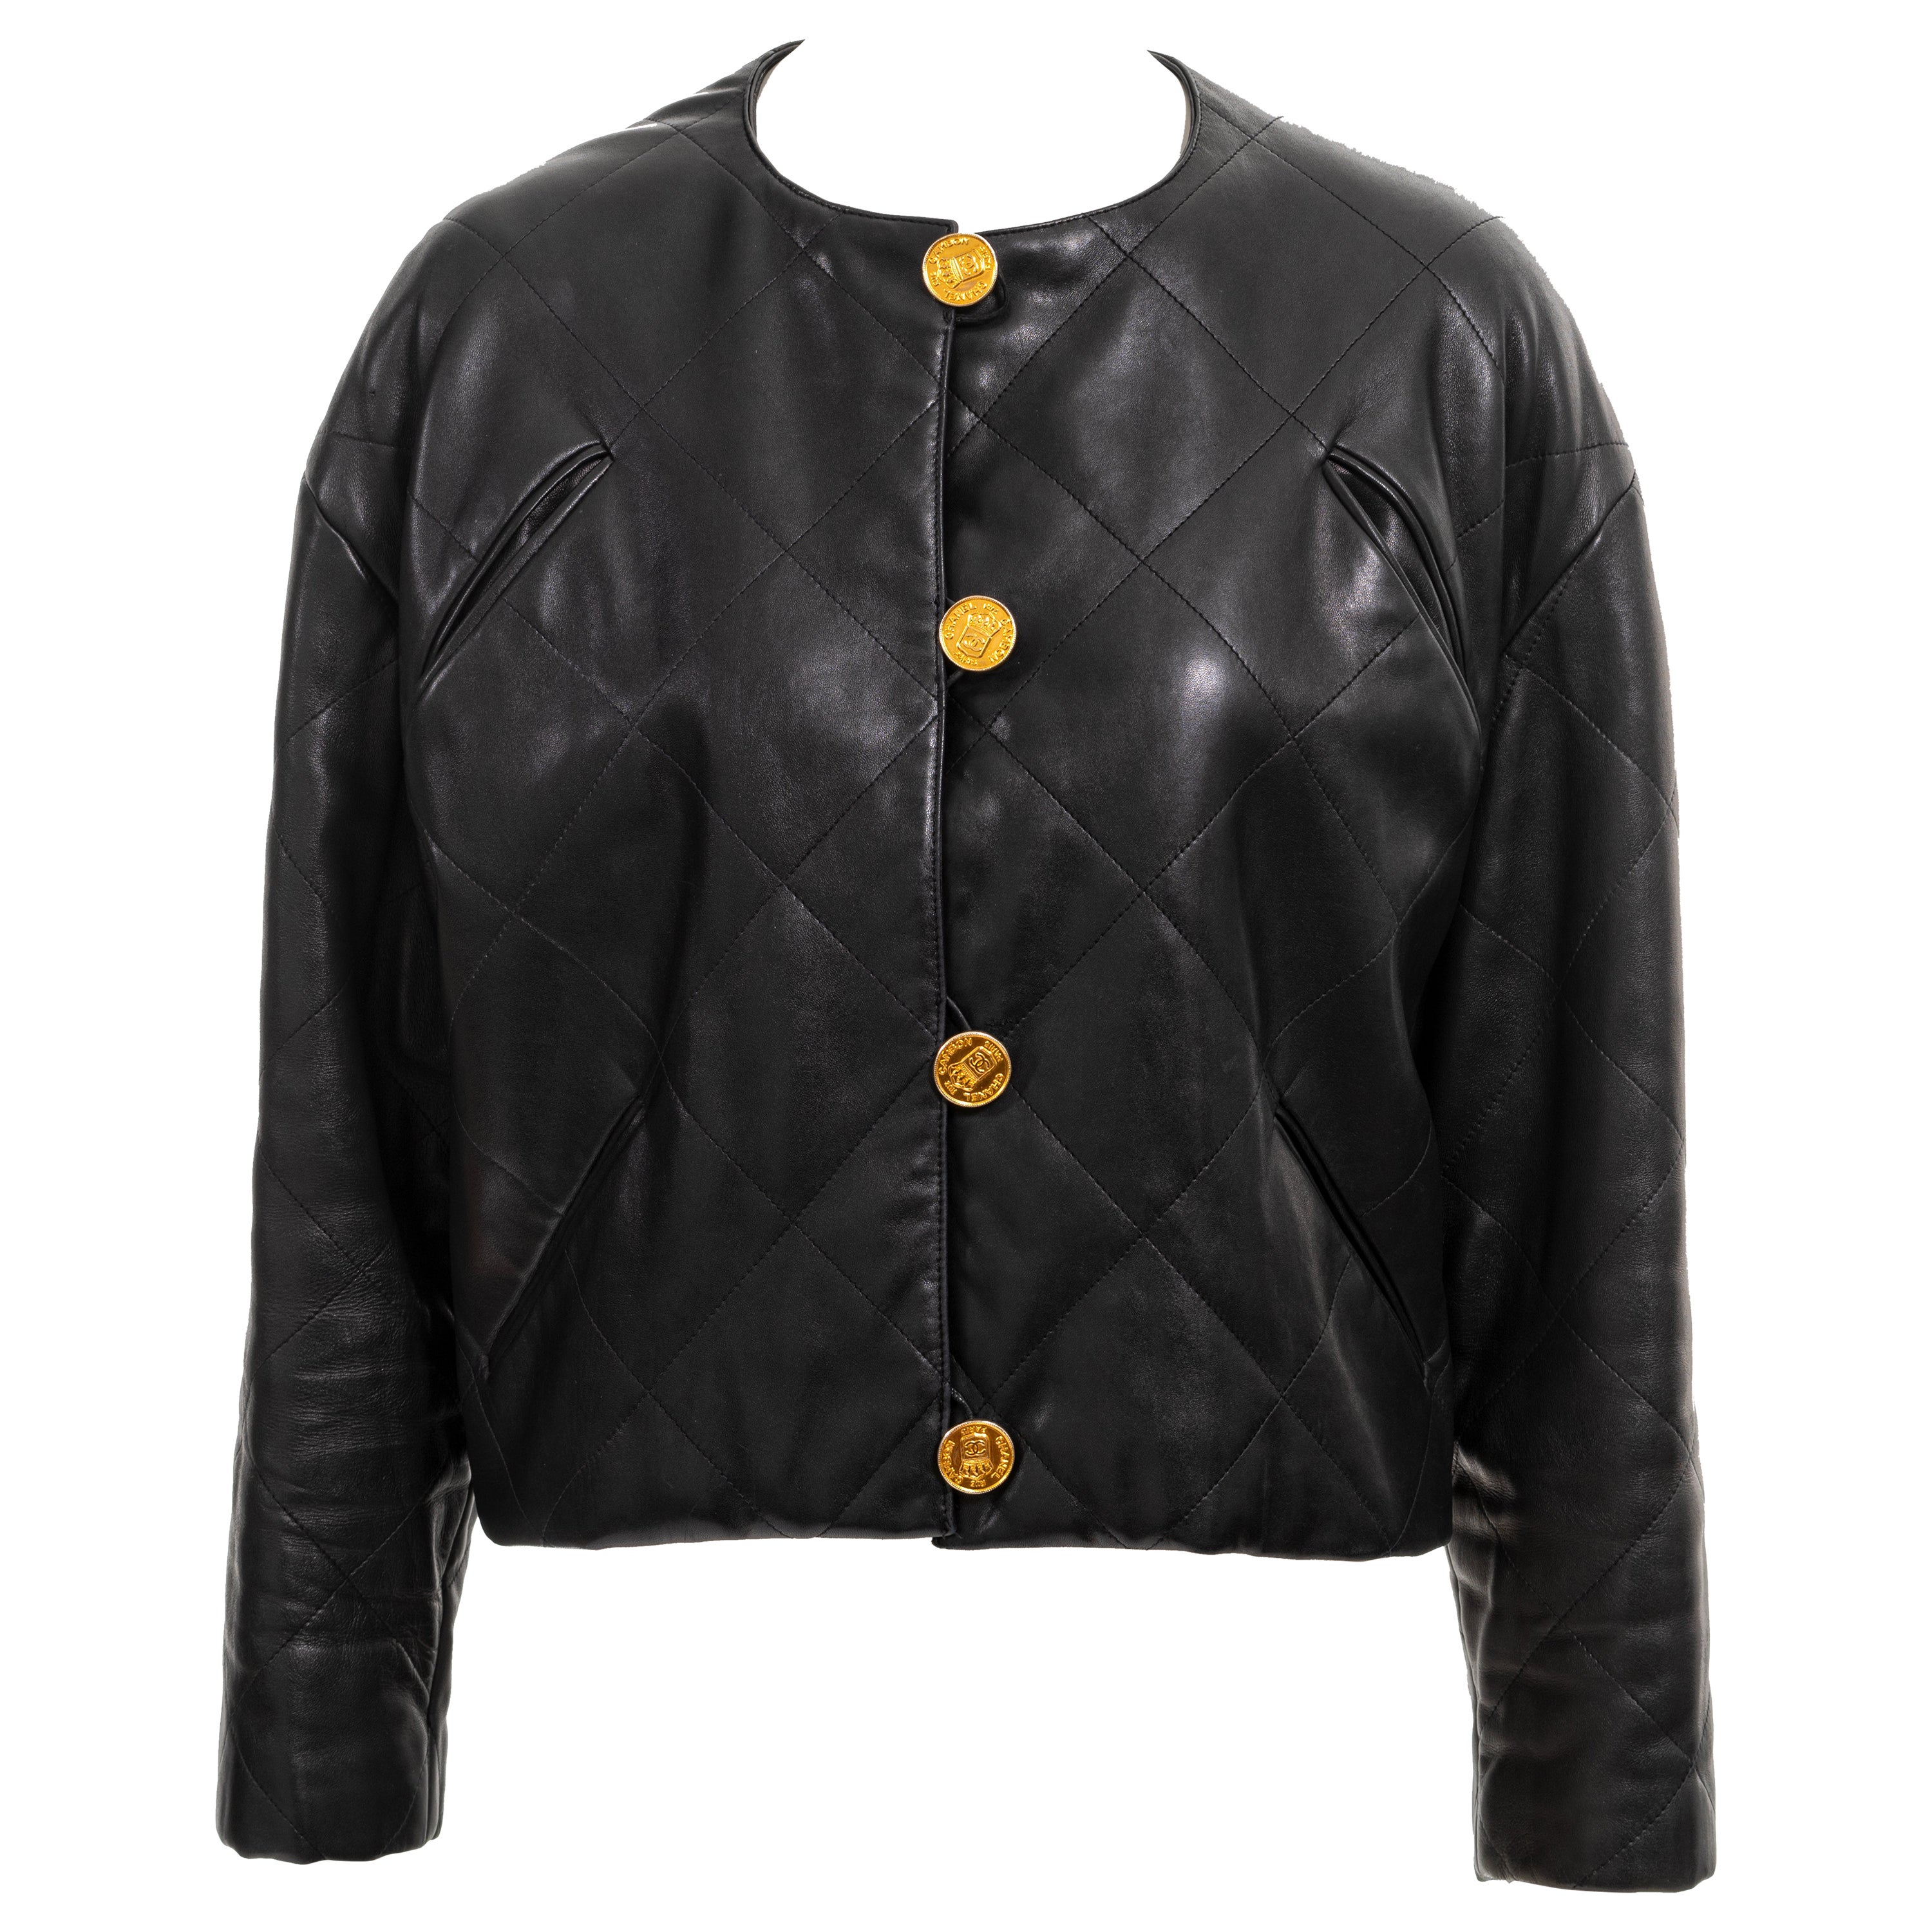 Chanel by Karl Lagerfeld black quilted lambskin leather jacket, fw 1987